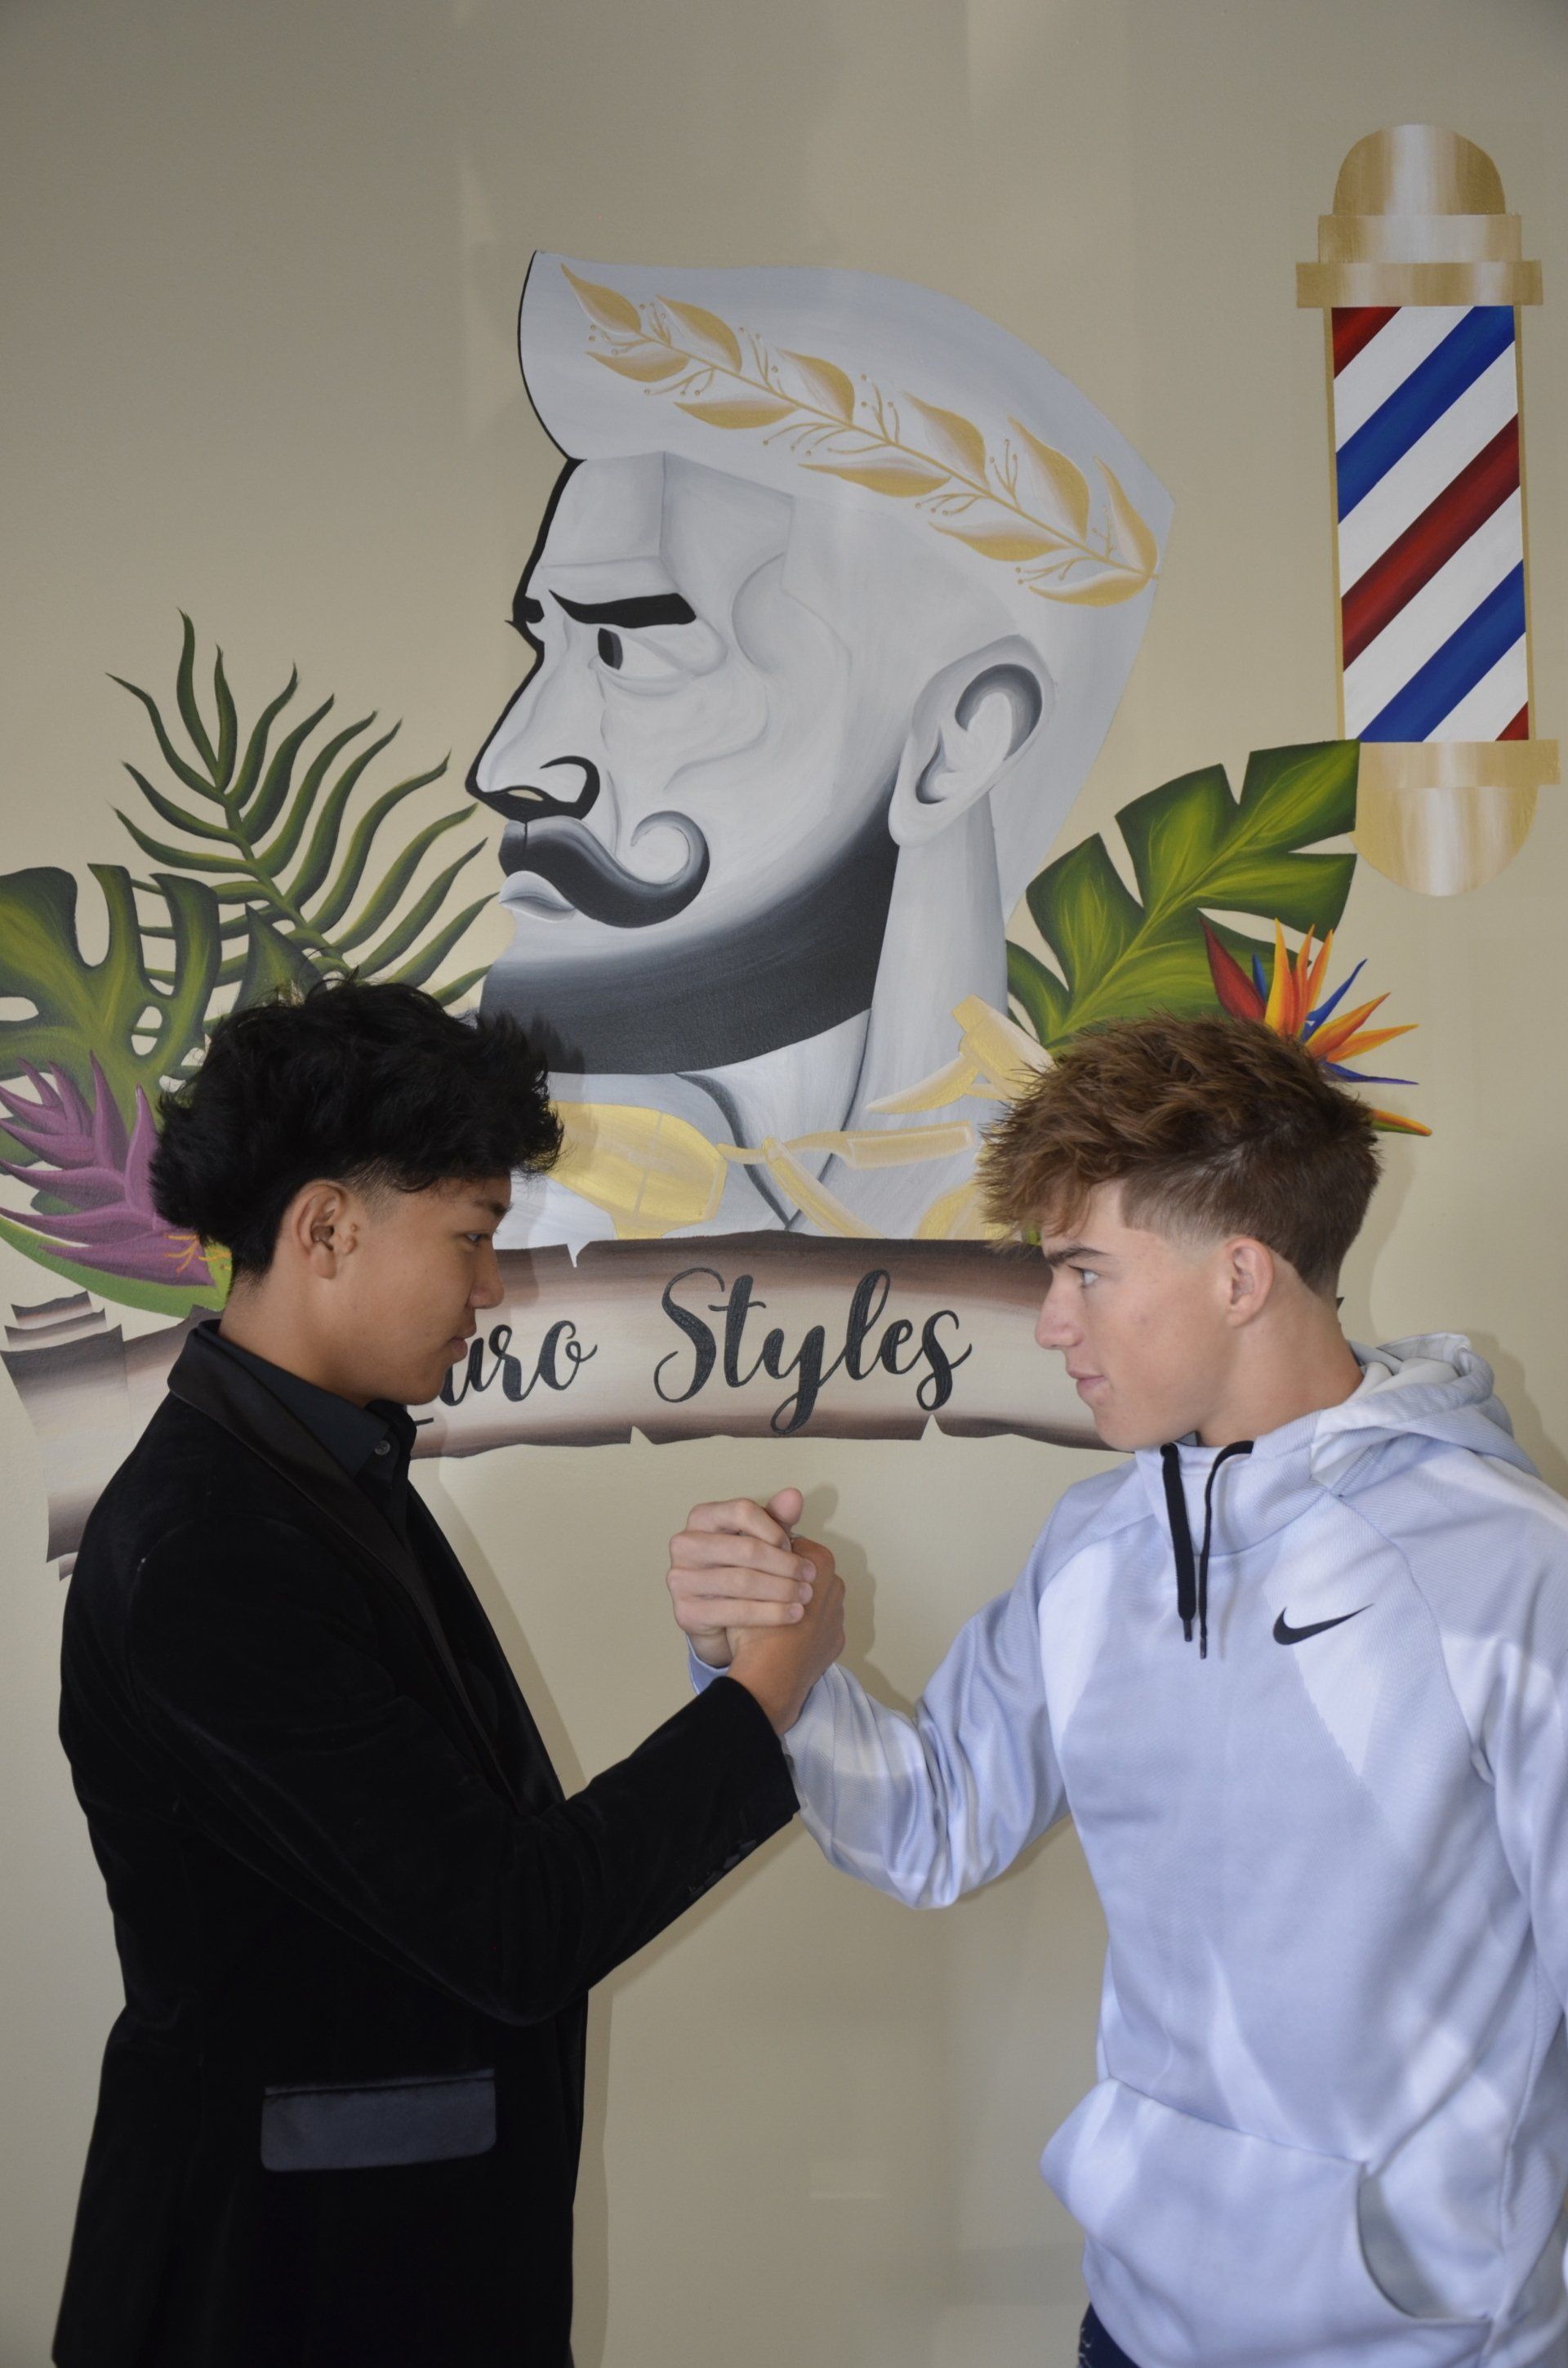 two young men are shaking hands in front of a barber pole .